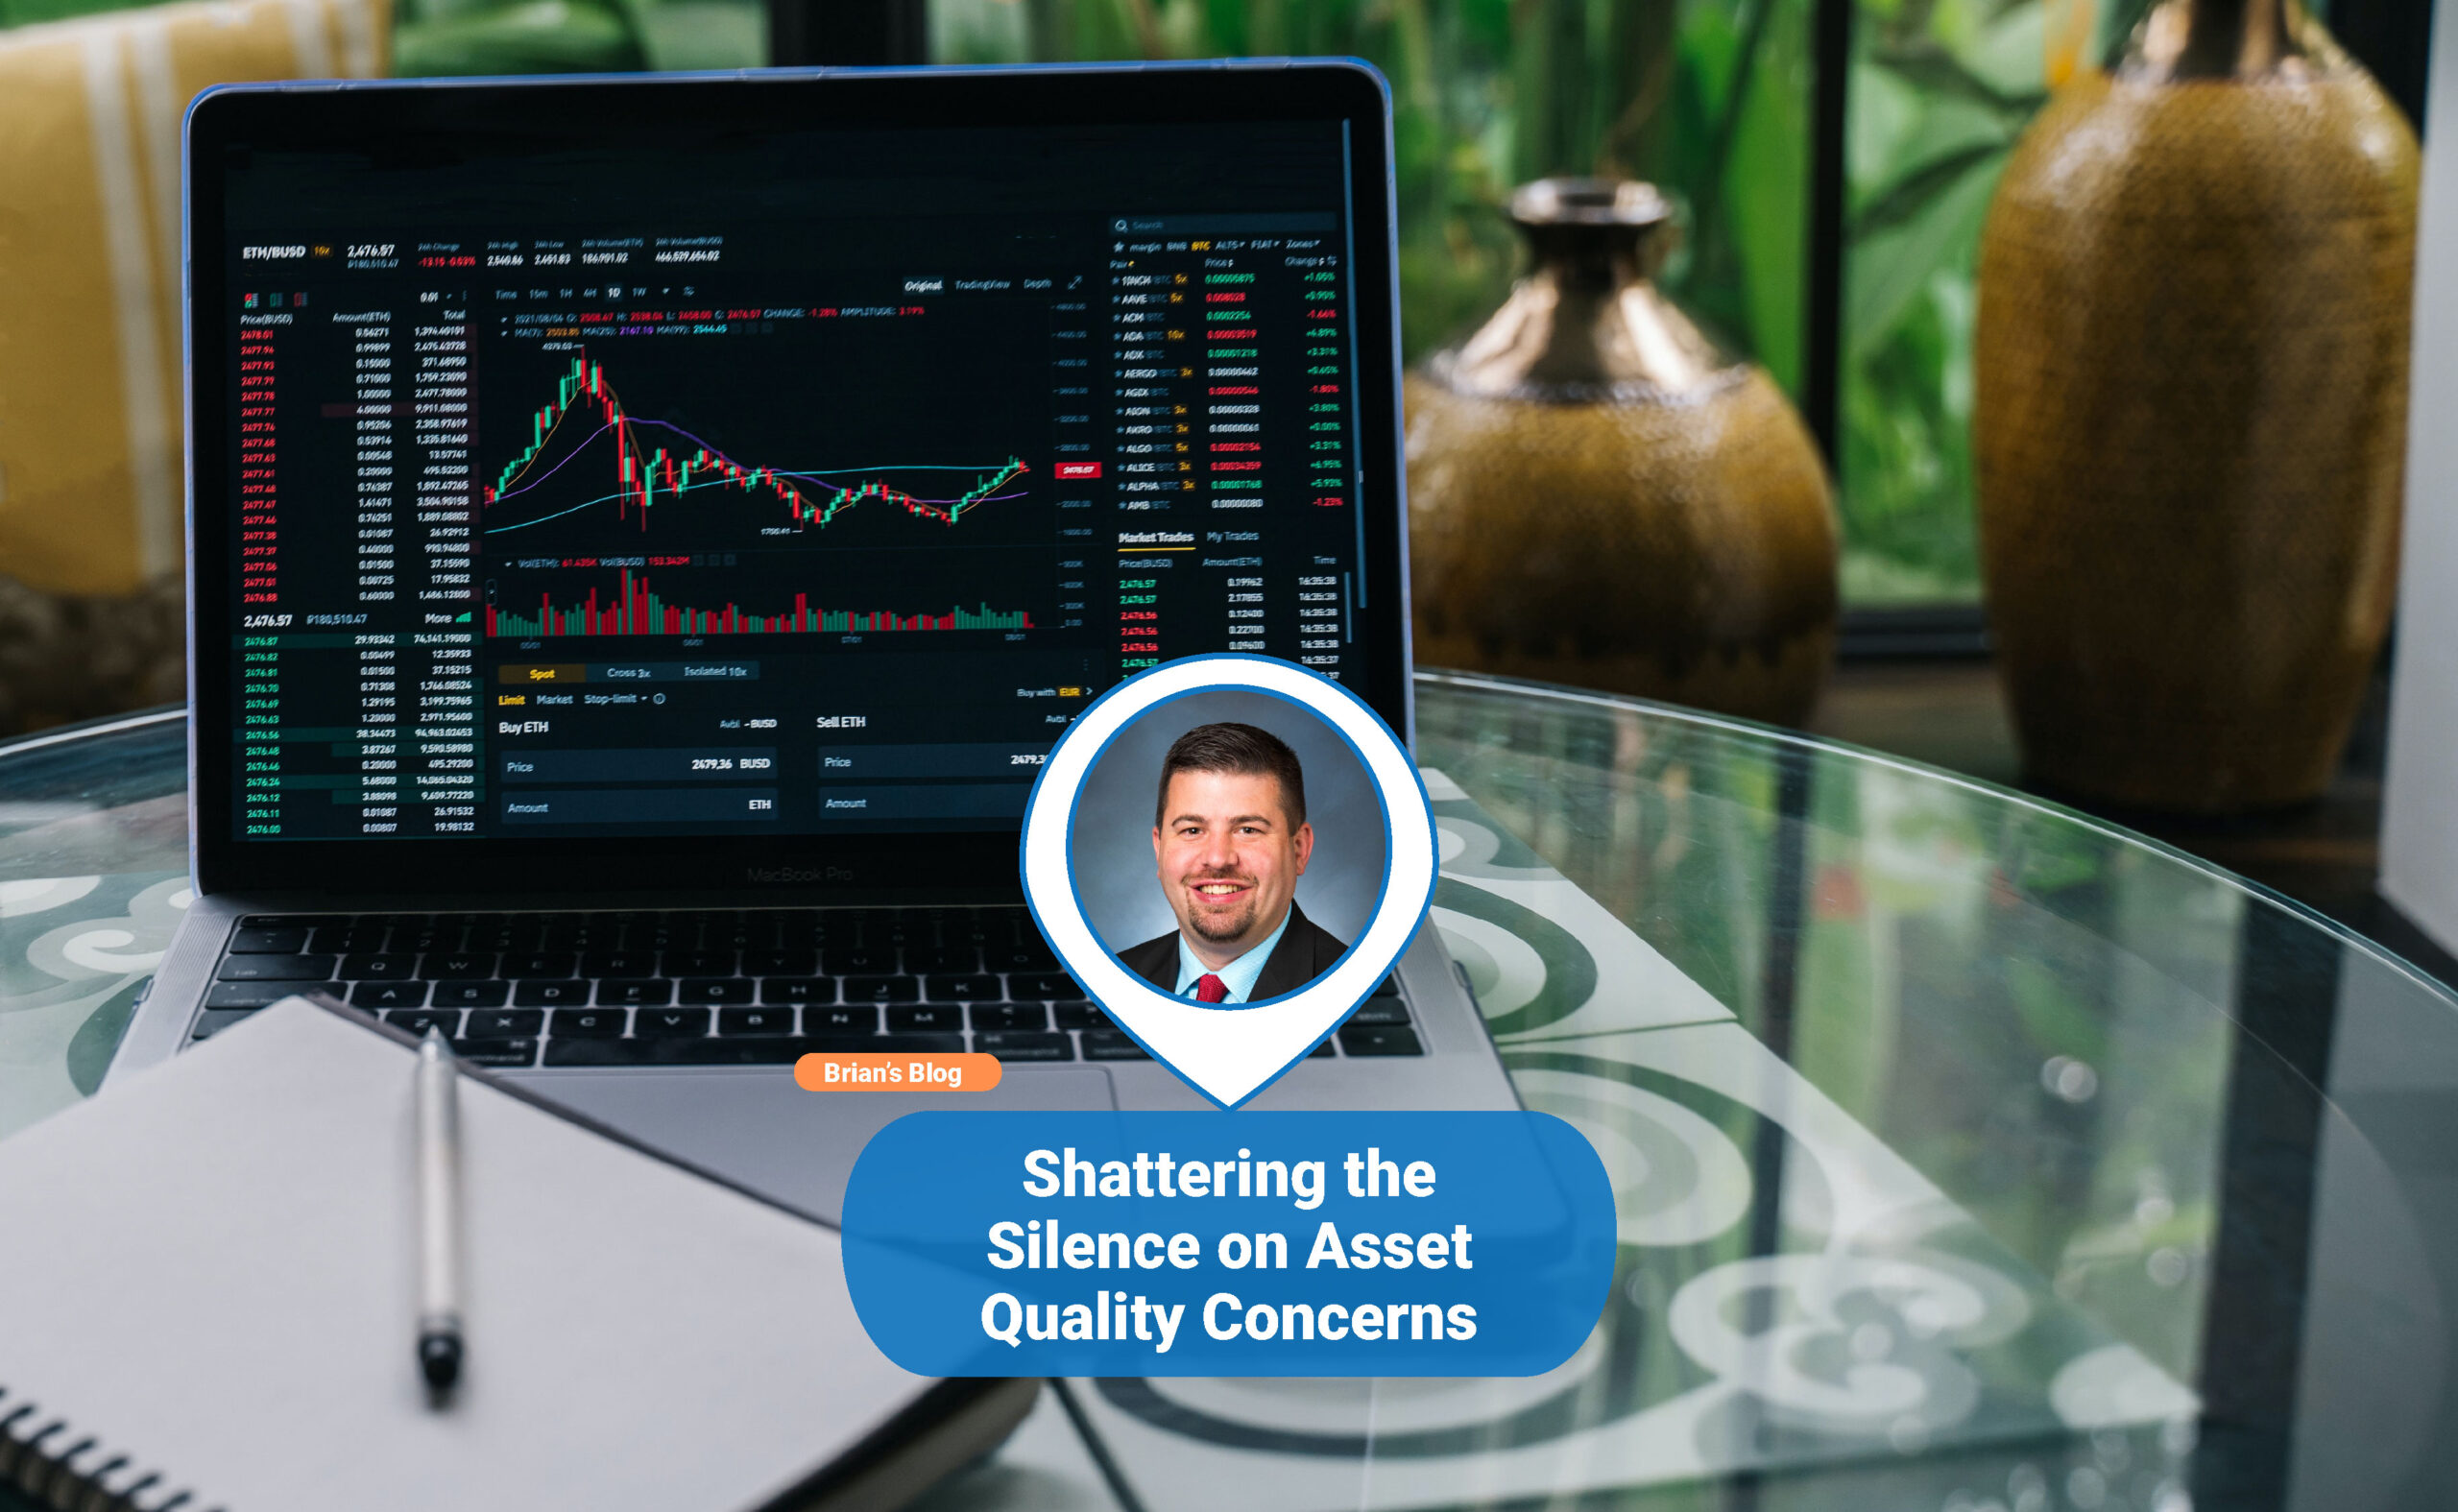 Shattering the Silence on Asset Quality Concerns